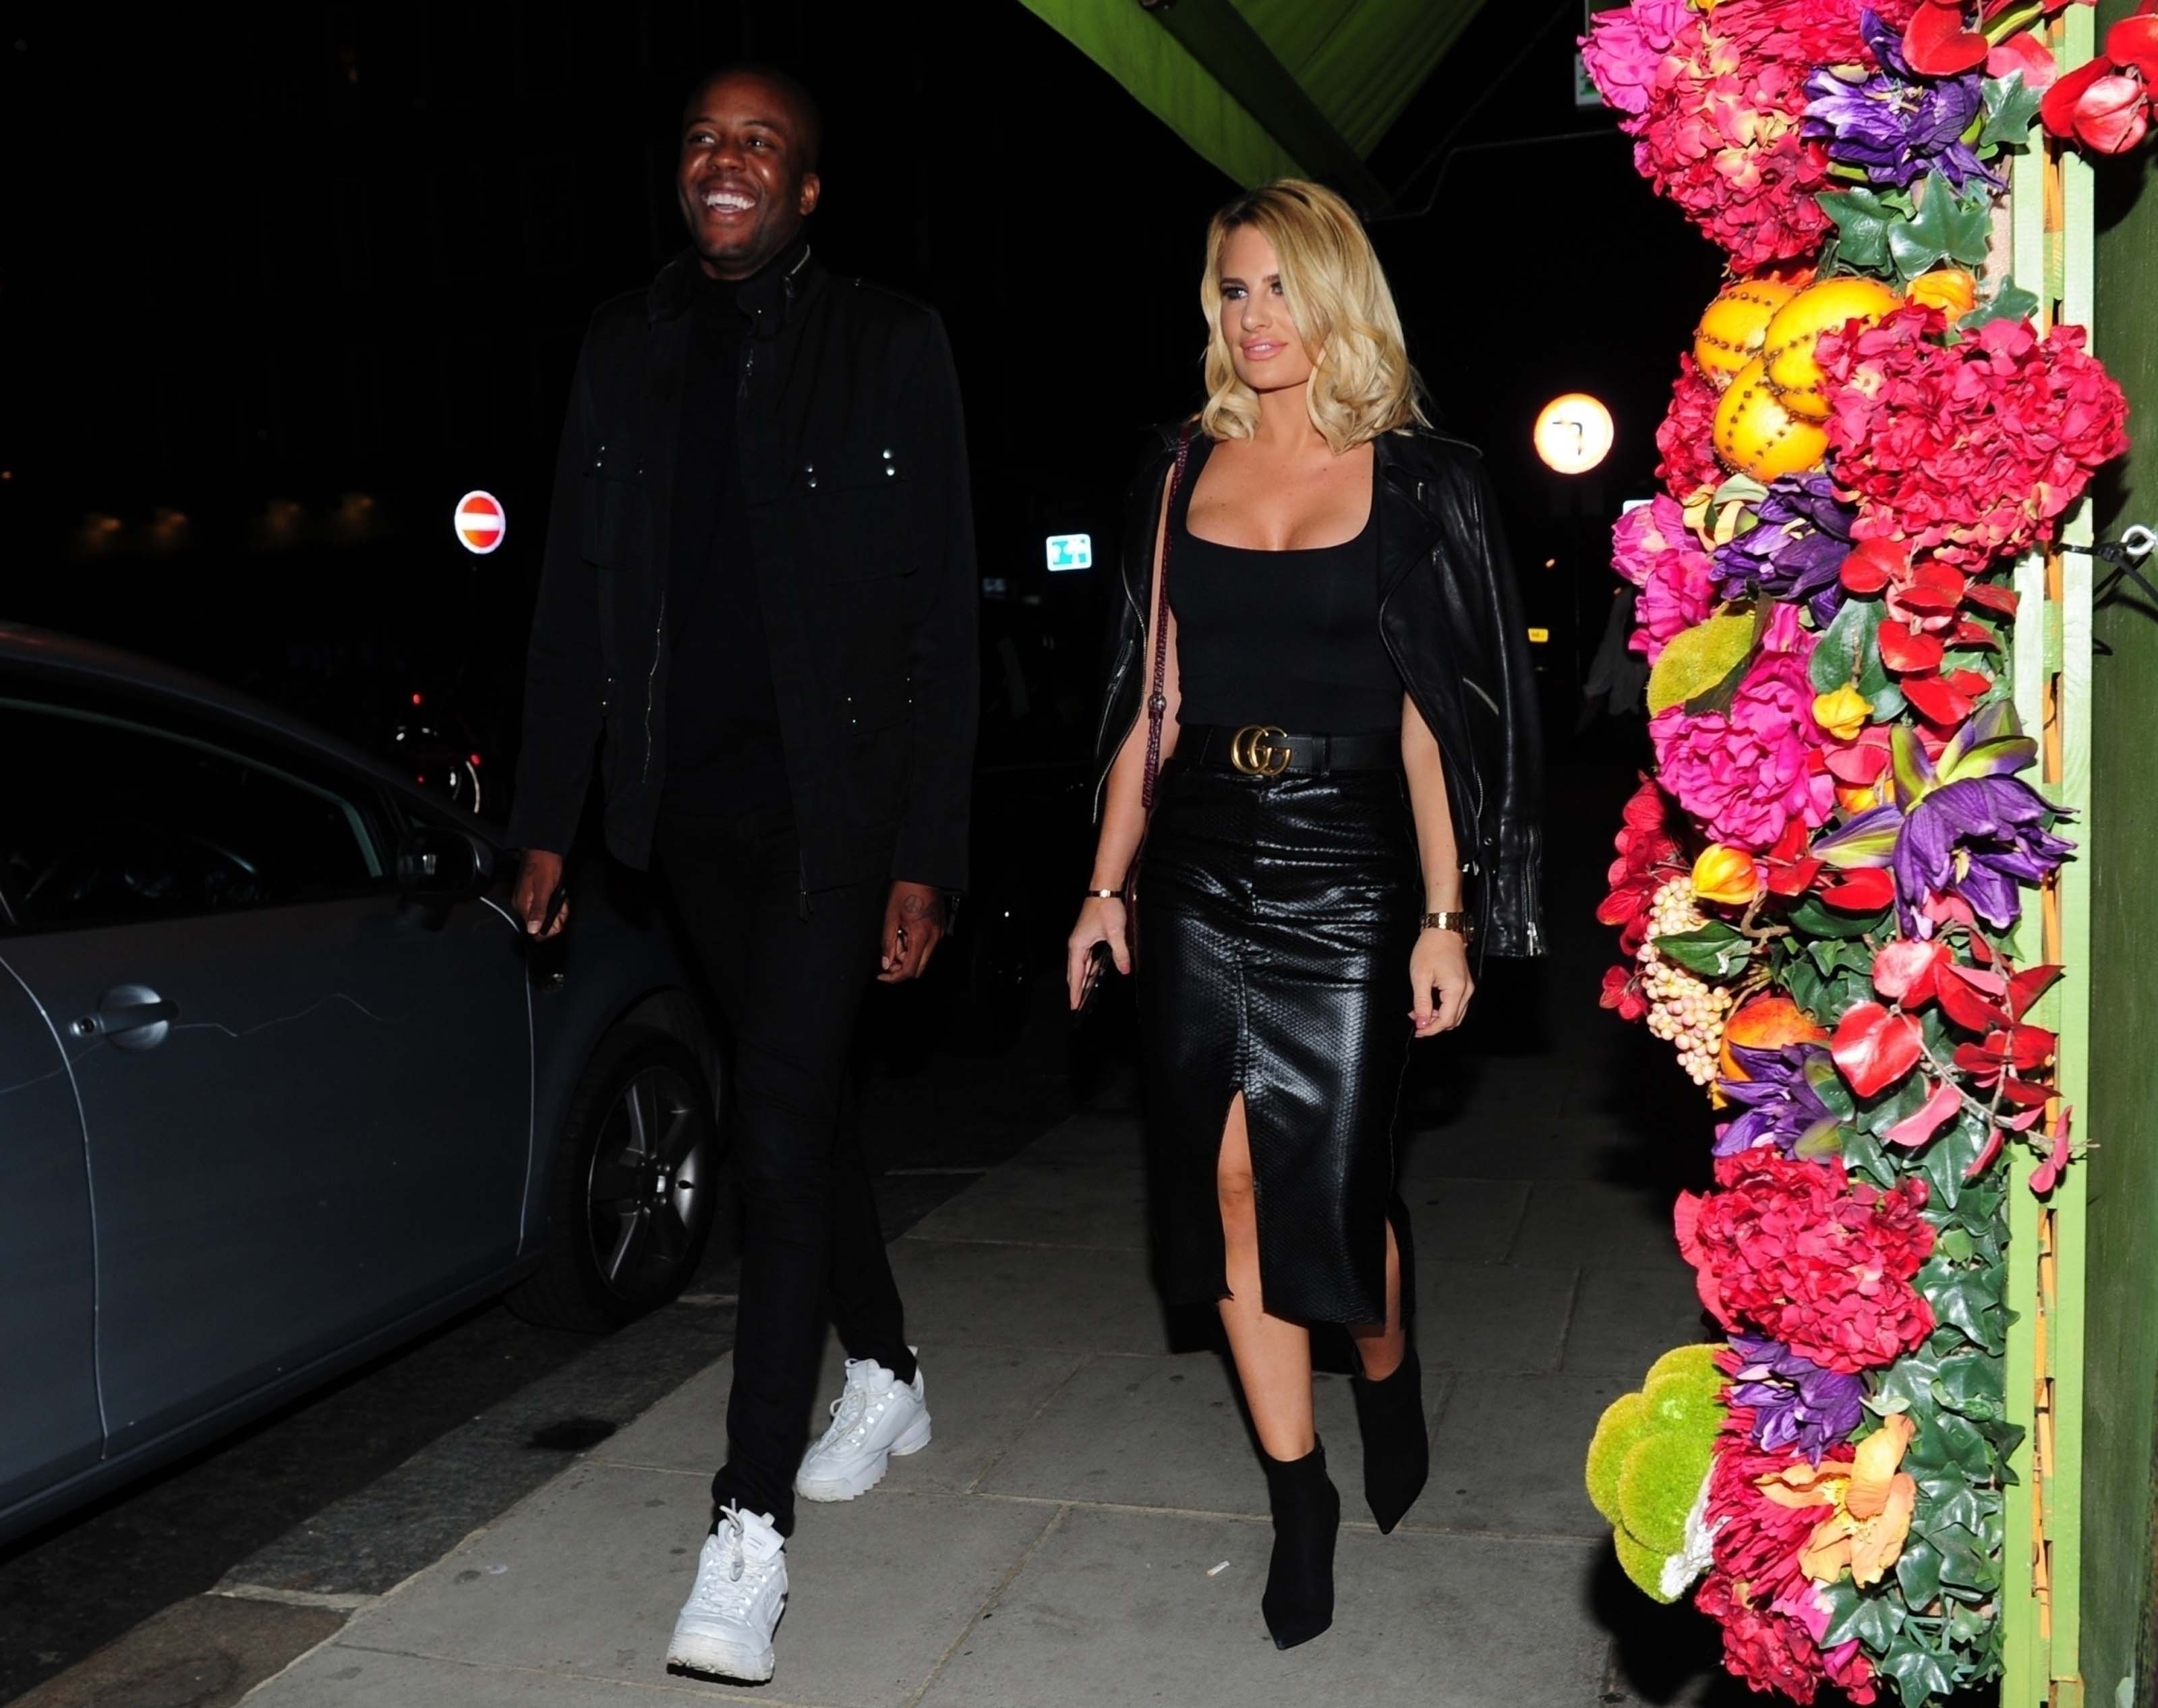 Danielle Armstrong attends Chloe Sims’ birthday party